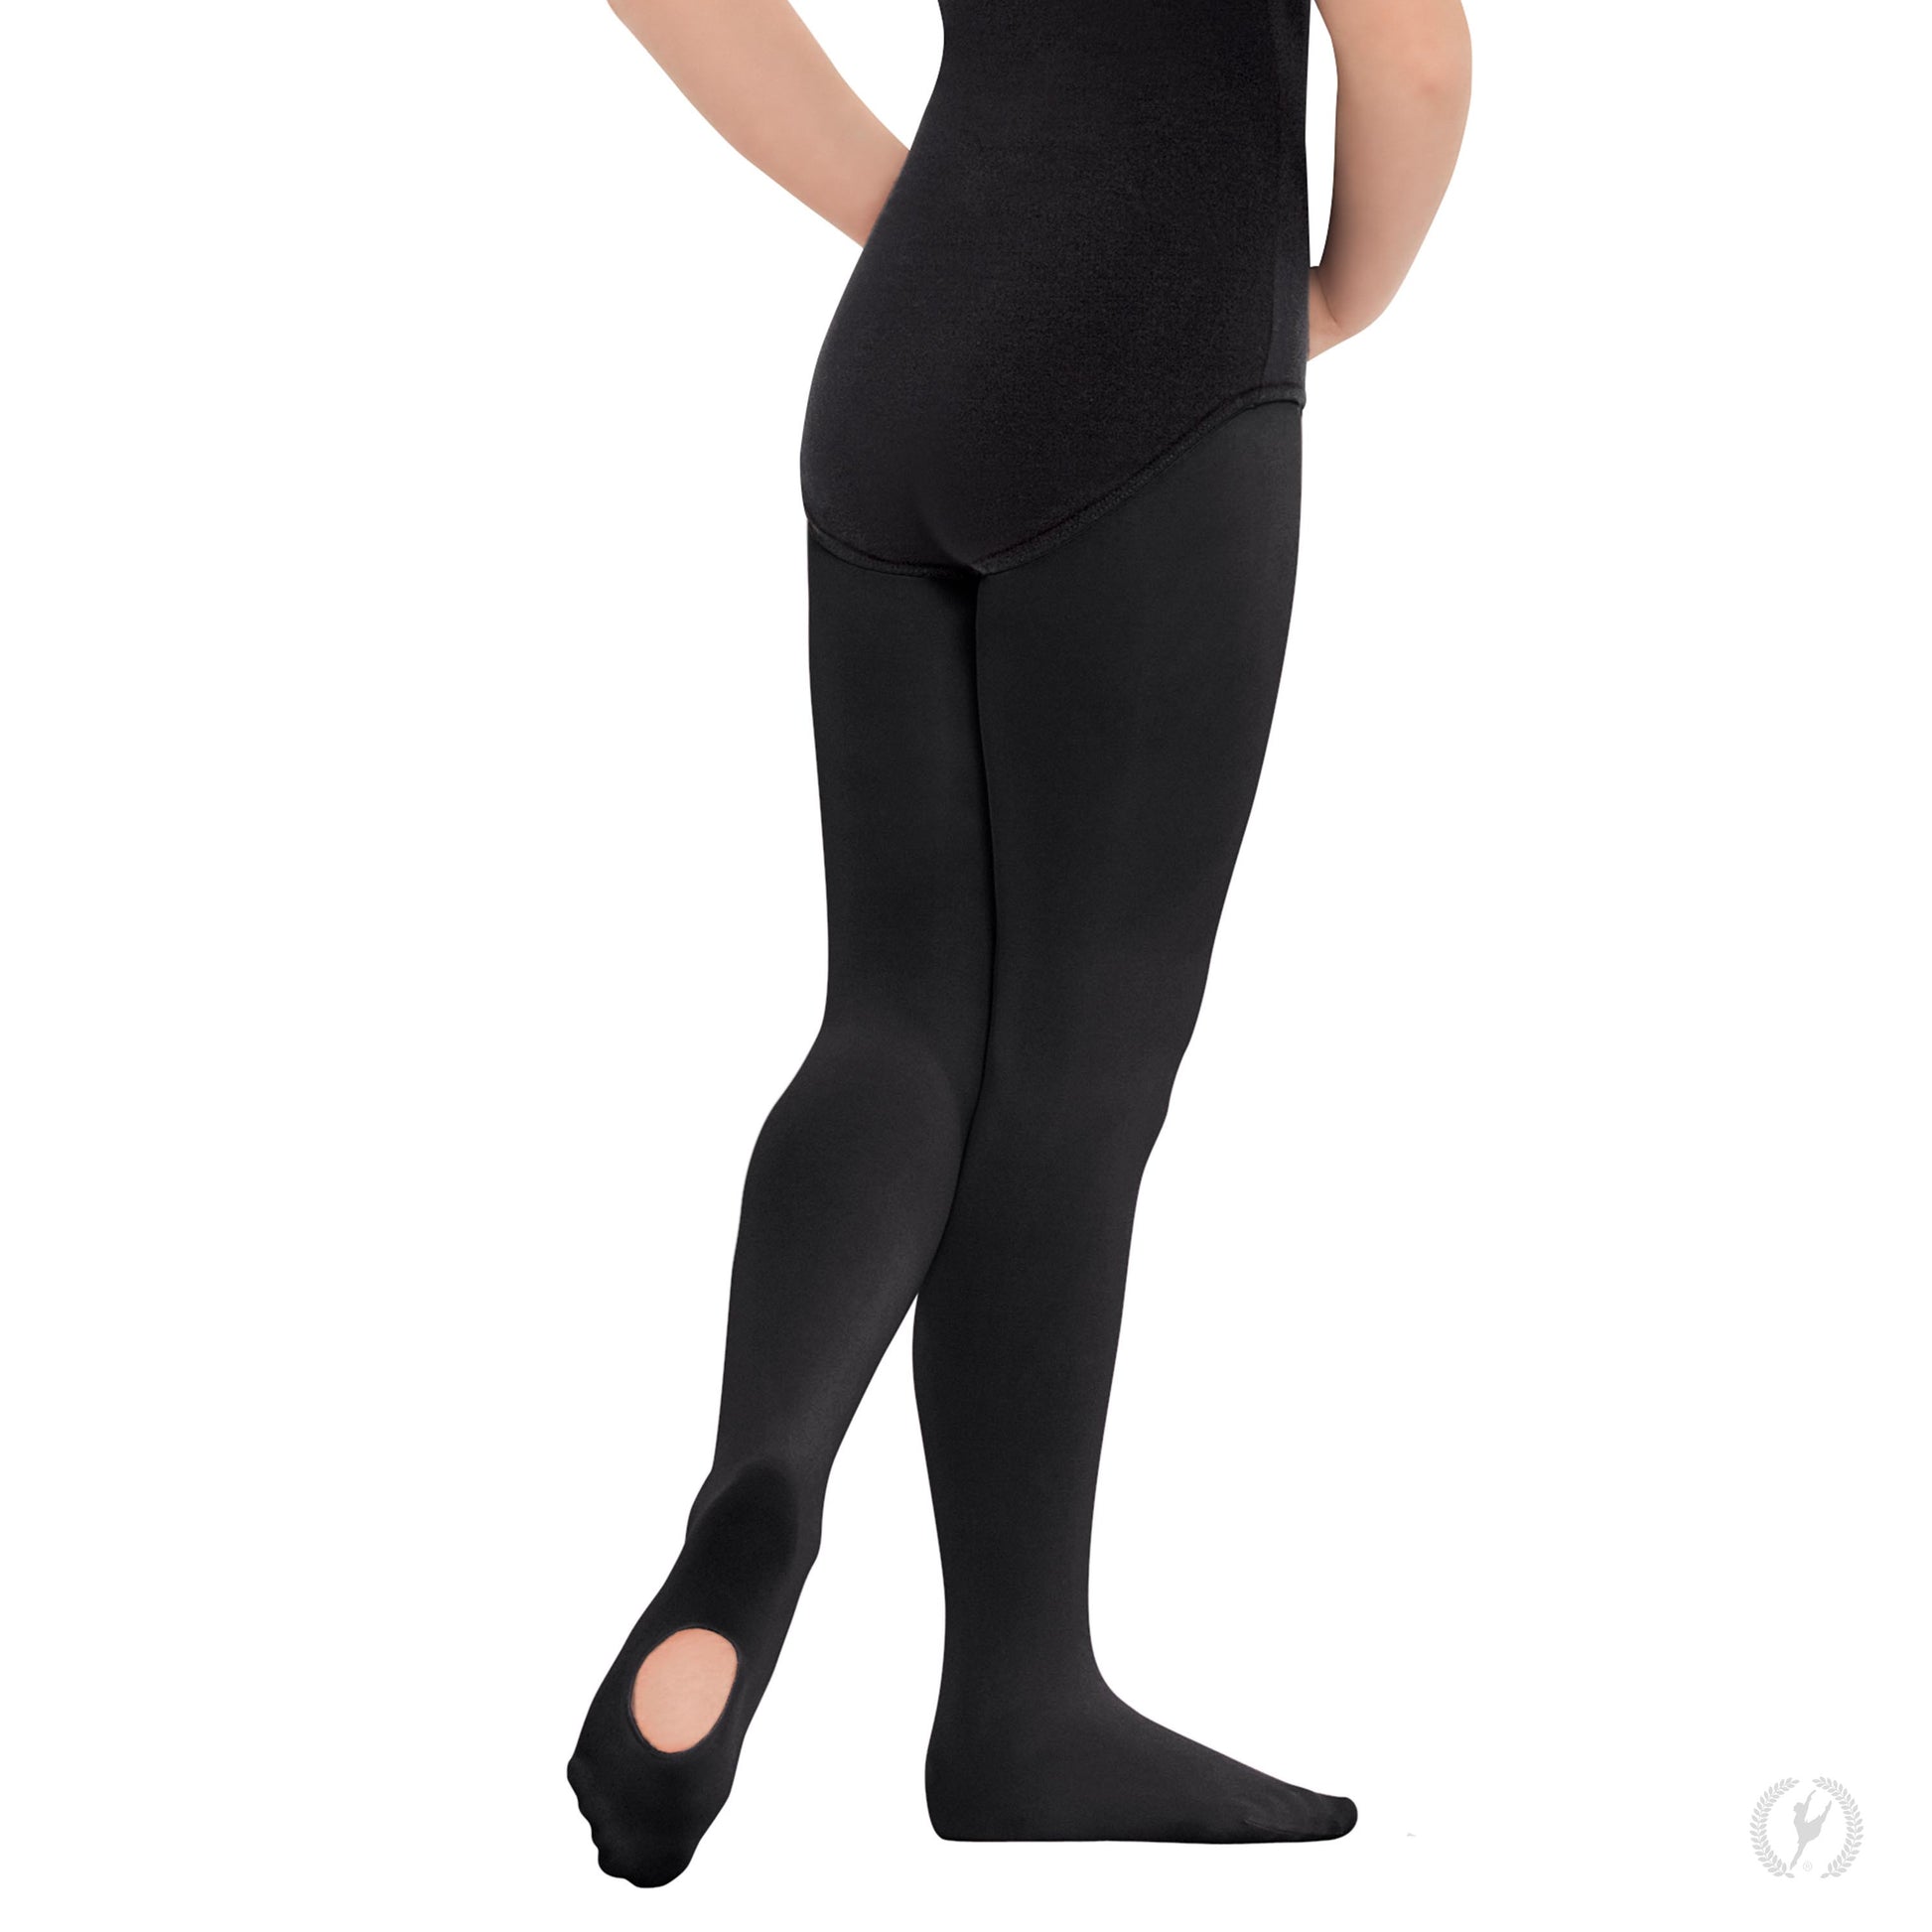 Eurotard 210c Non-Run Convertible Tights in Black sold by Dance Fashions Superstore in Roswell, Georgia. Dance Tights in Black for Girls.